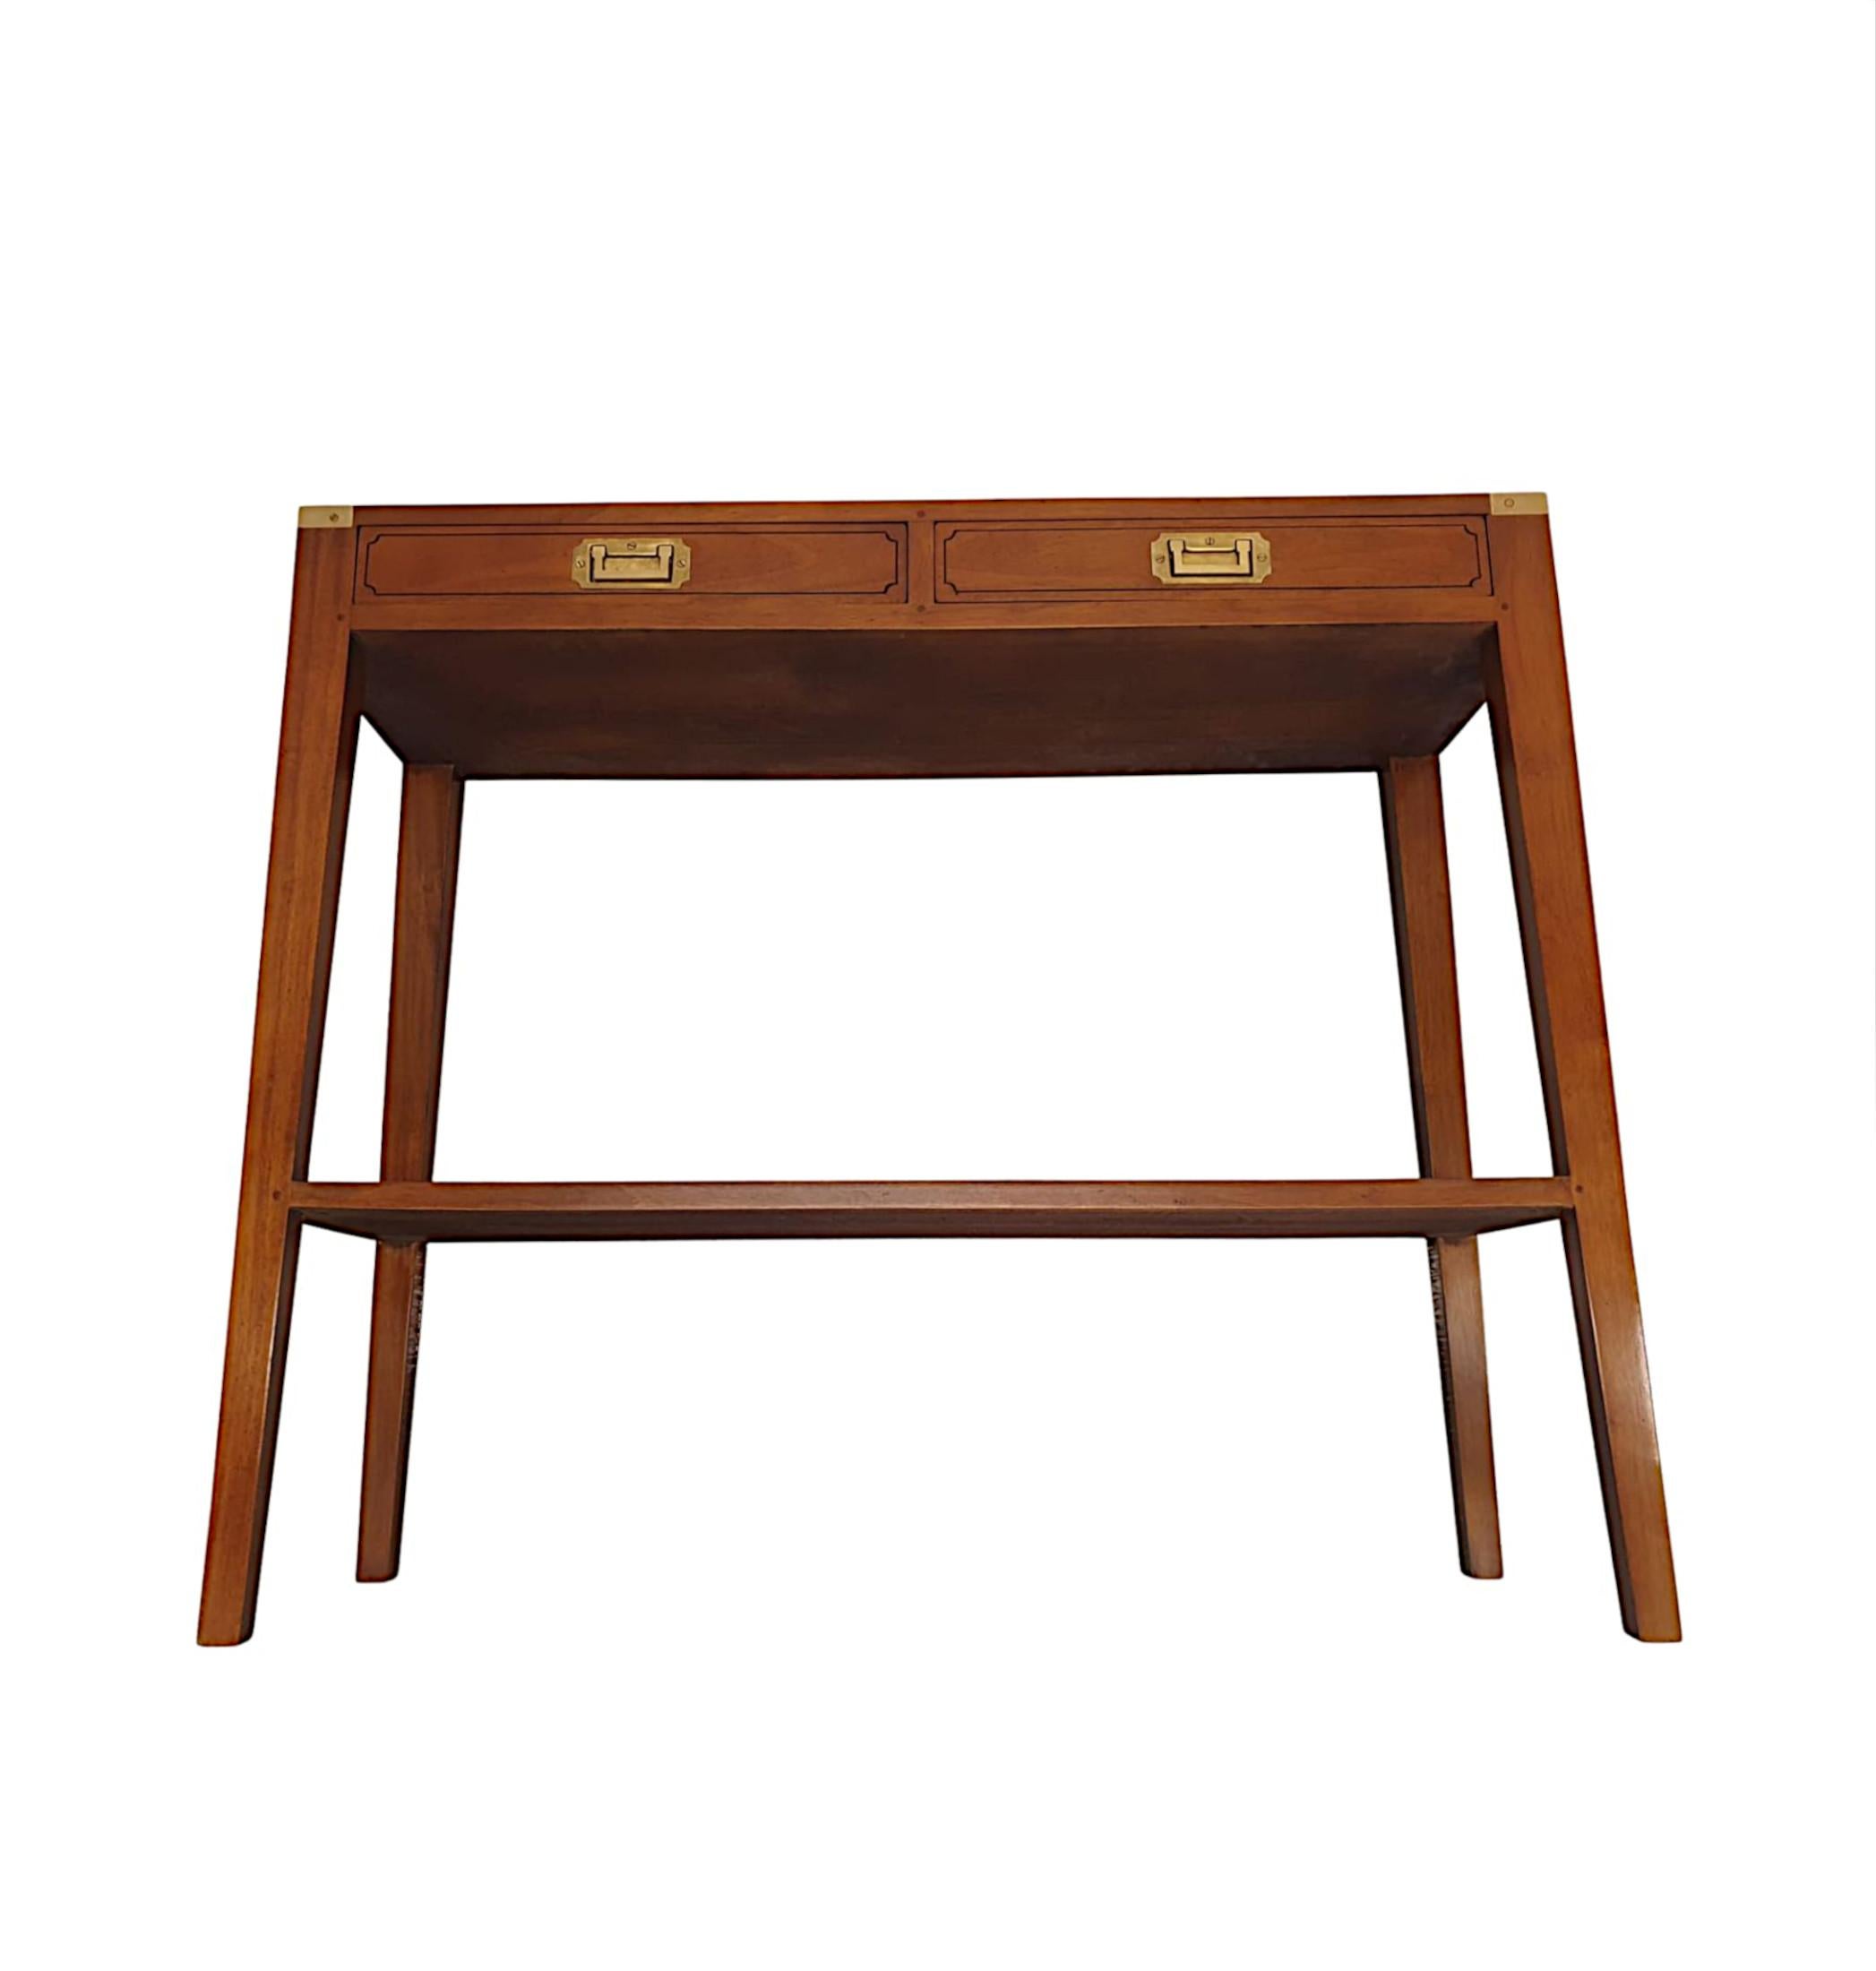 Contemporary A Fine Campaign Style Cherrywood Console Table For Sale